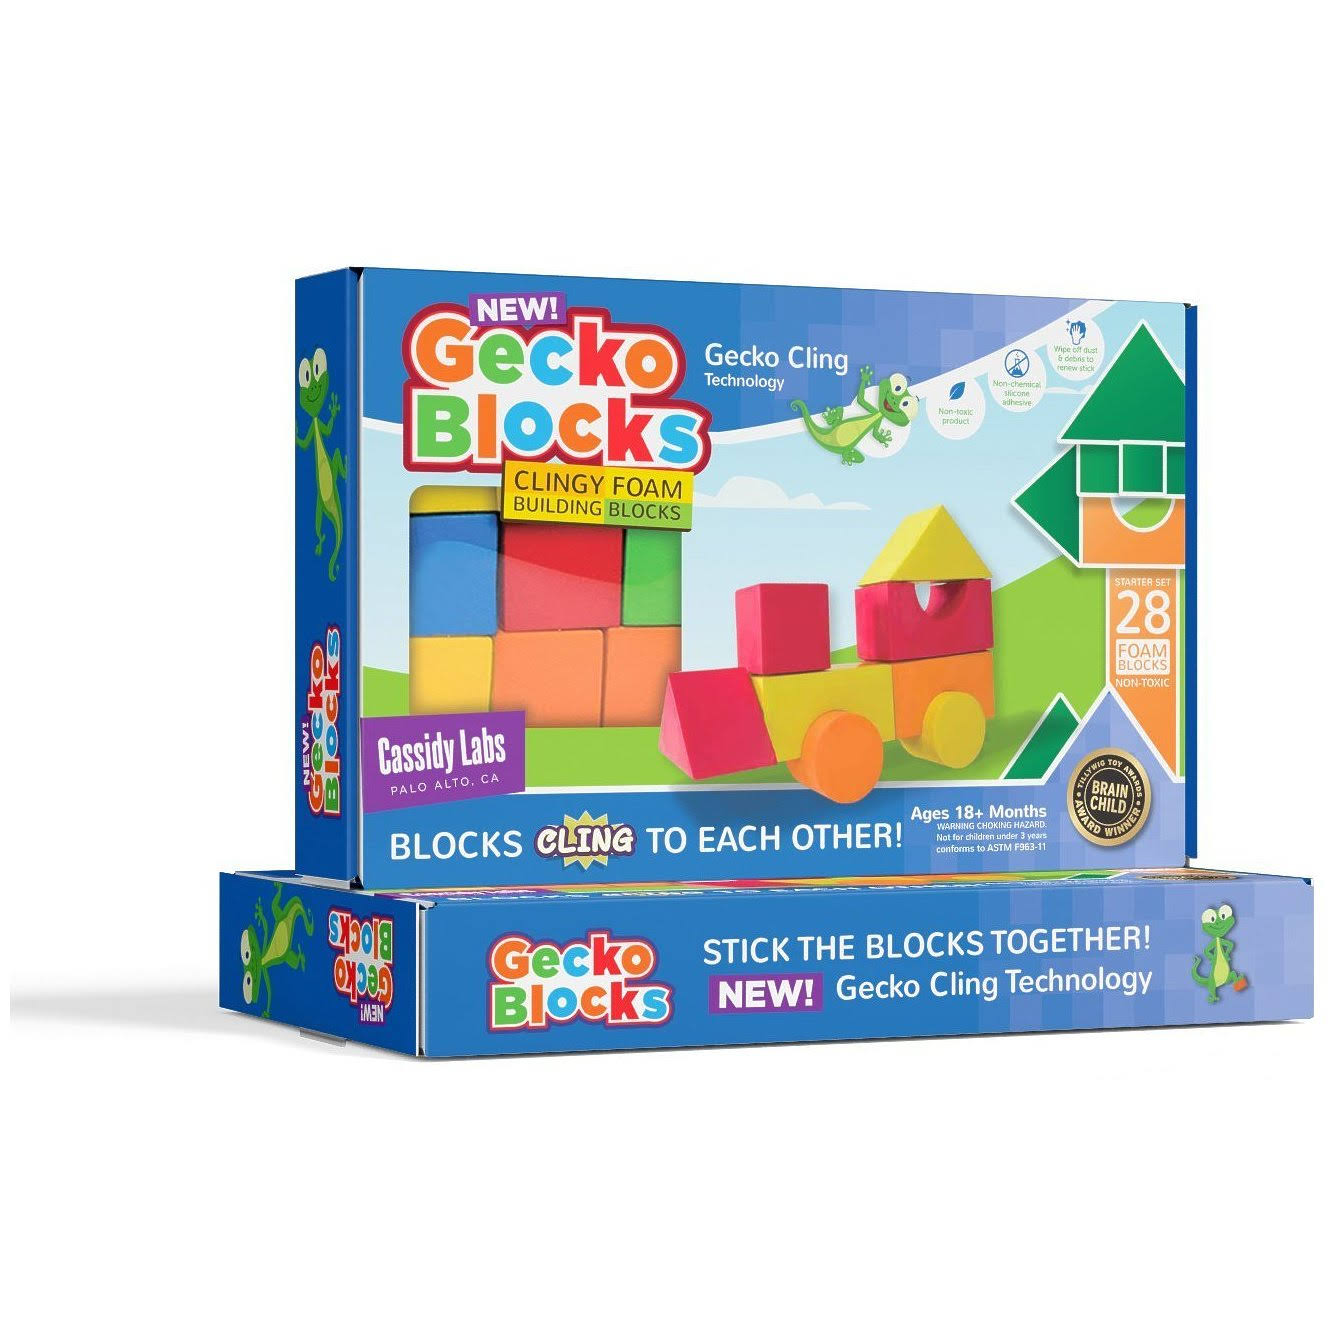 Cassidy Labs Gecko Blocks Sticky Block Construction Toy For Kids Works